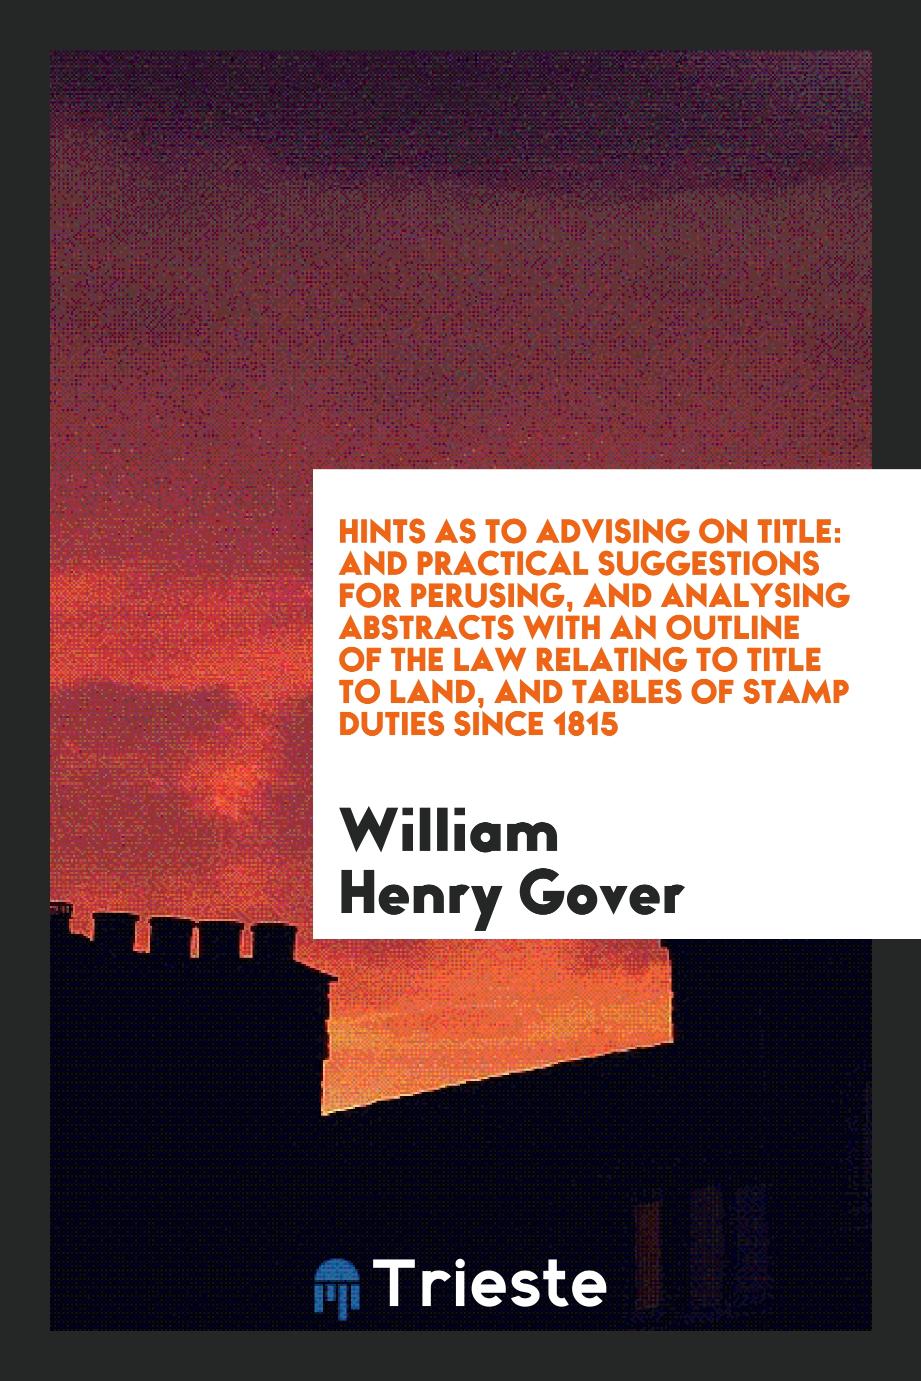 Hints as to Advising on Title: And Practical Suggestions for Perusing, and Analysing Abstracts with an Outline of the Law Relating to Title to Land, and Tables of Stamp Duties Since 1815